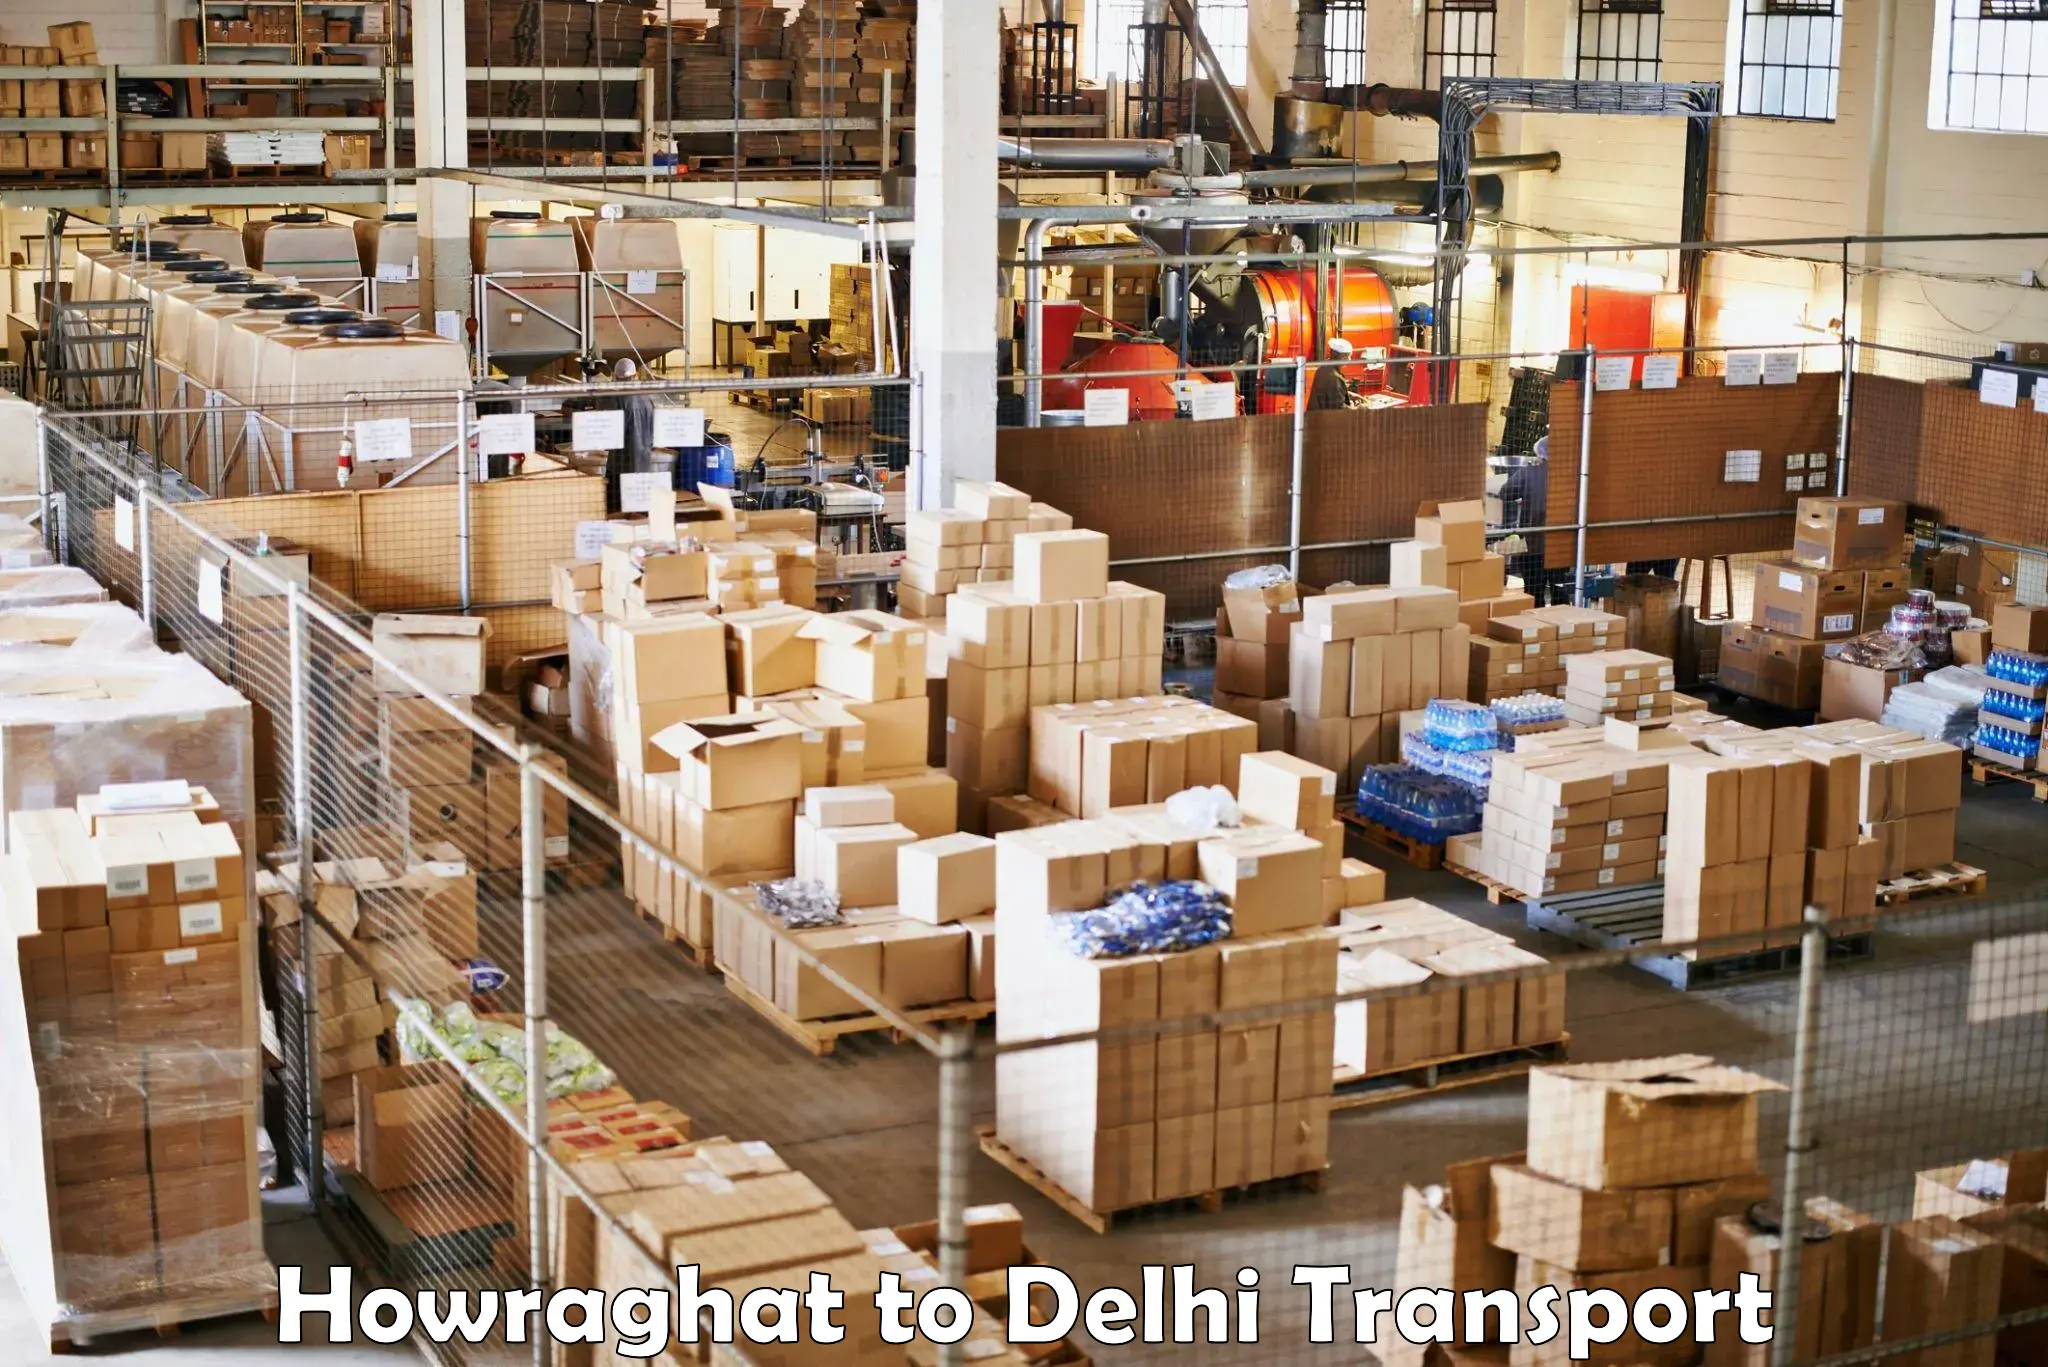 Goods delivery service Howraghat to Delhi